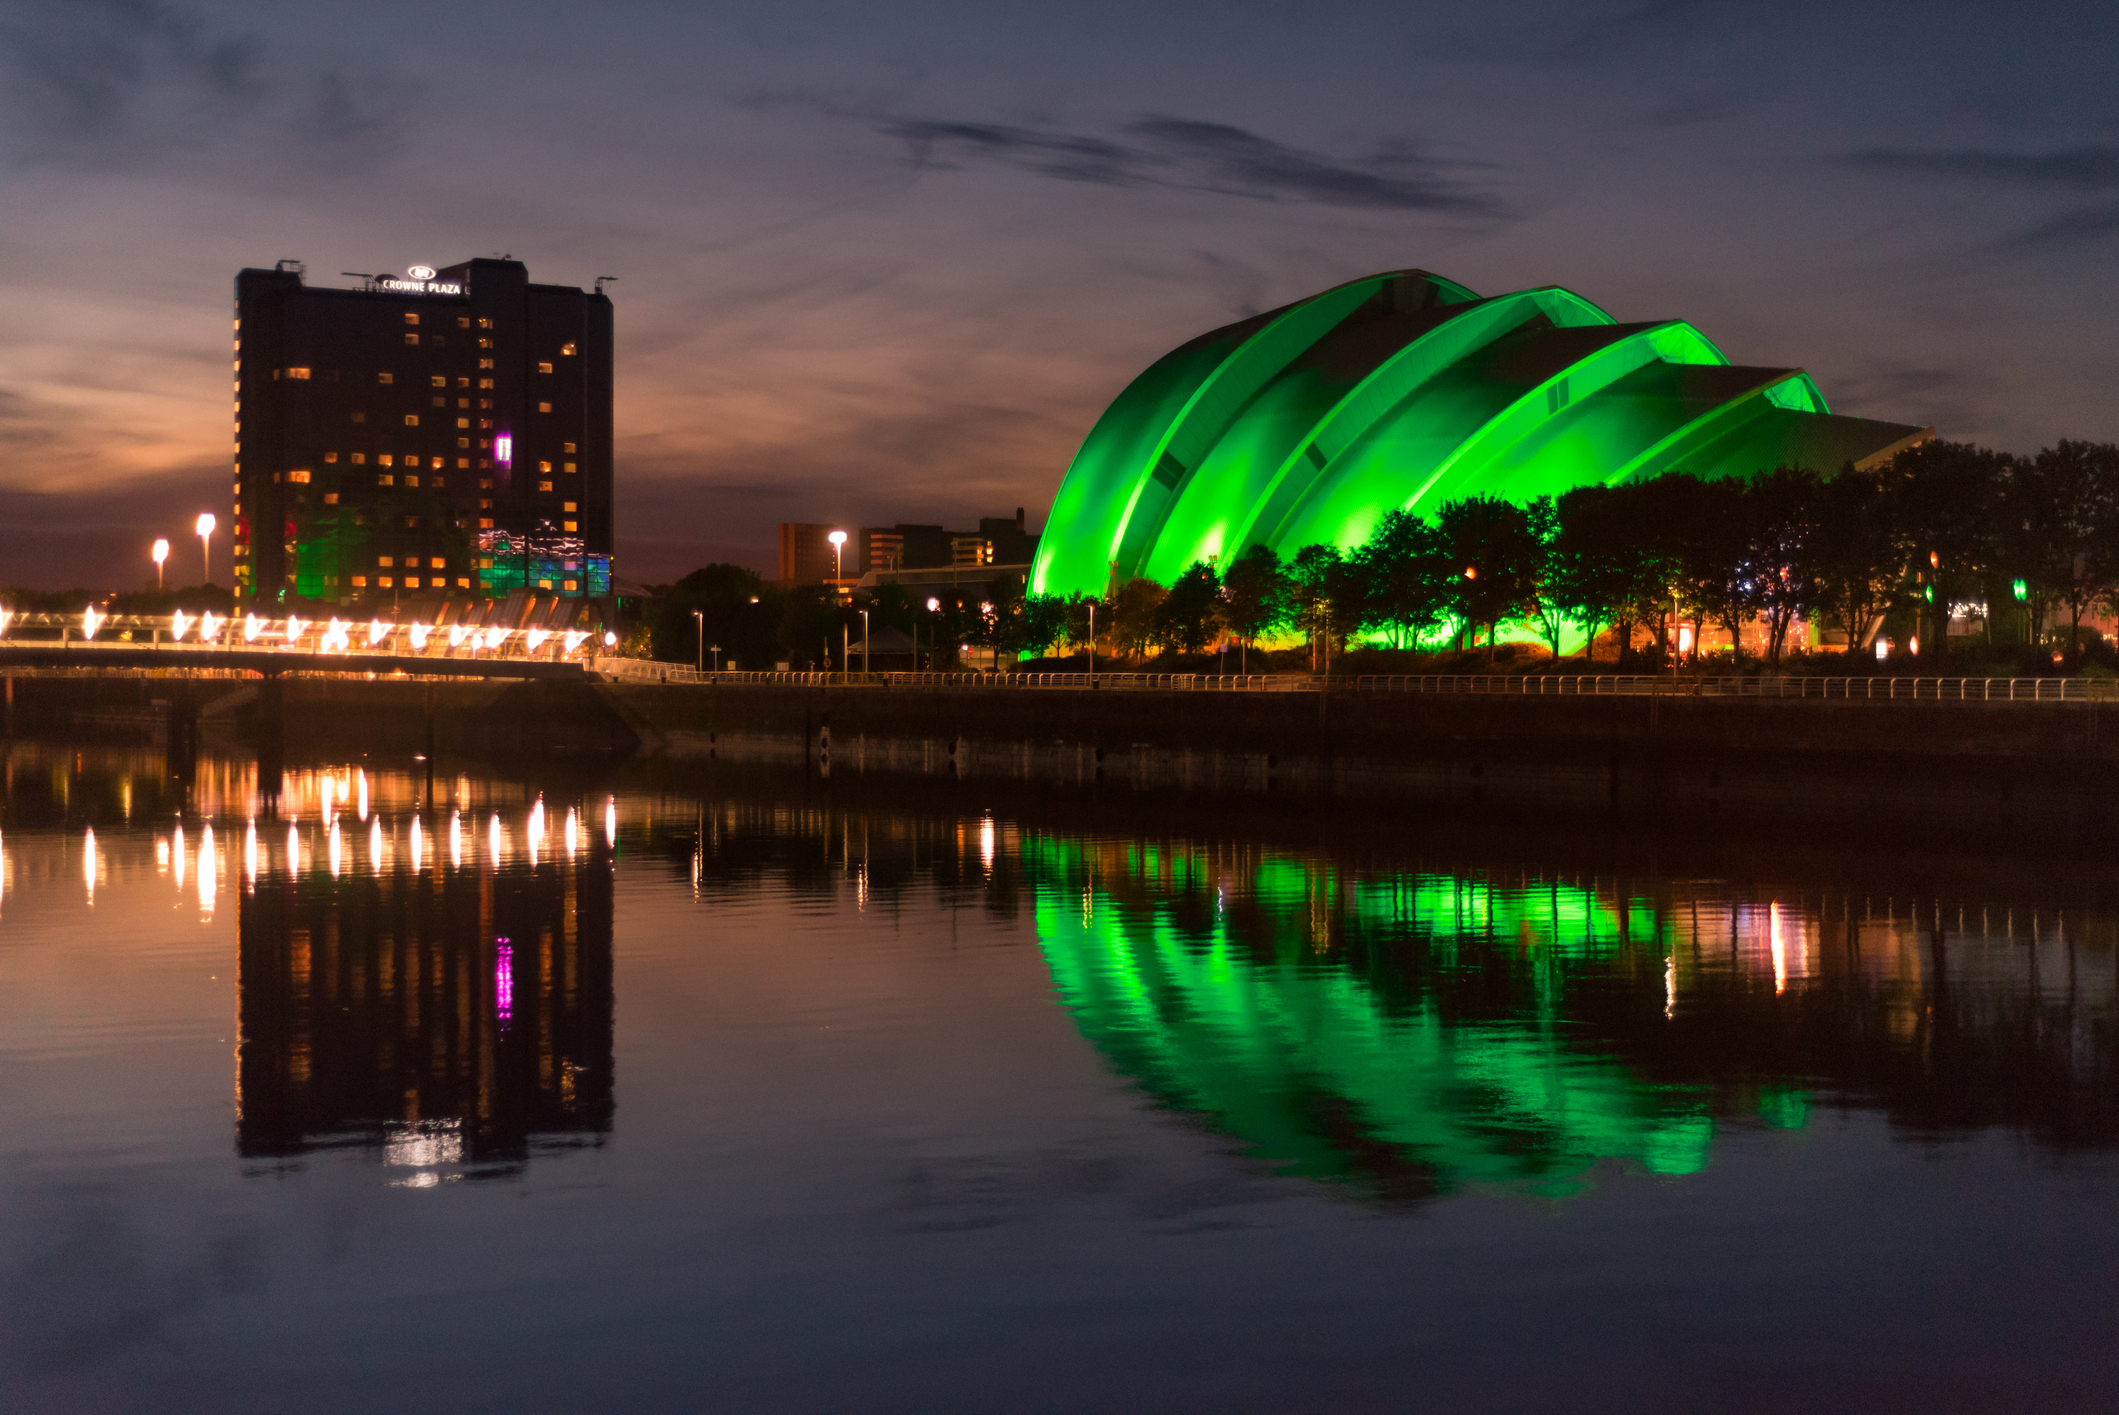 The Scottish Event Campus in Glasgow, illuminated by green lights at night